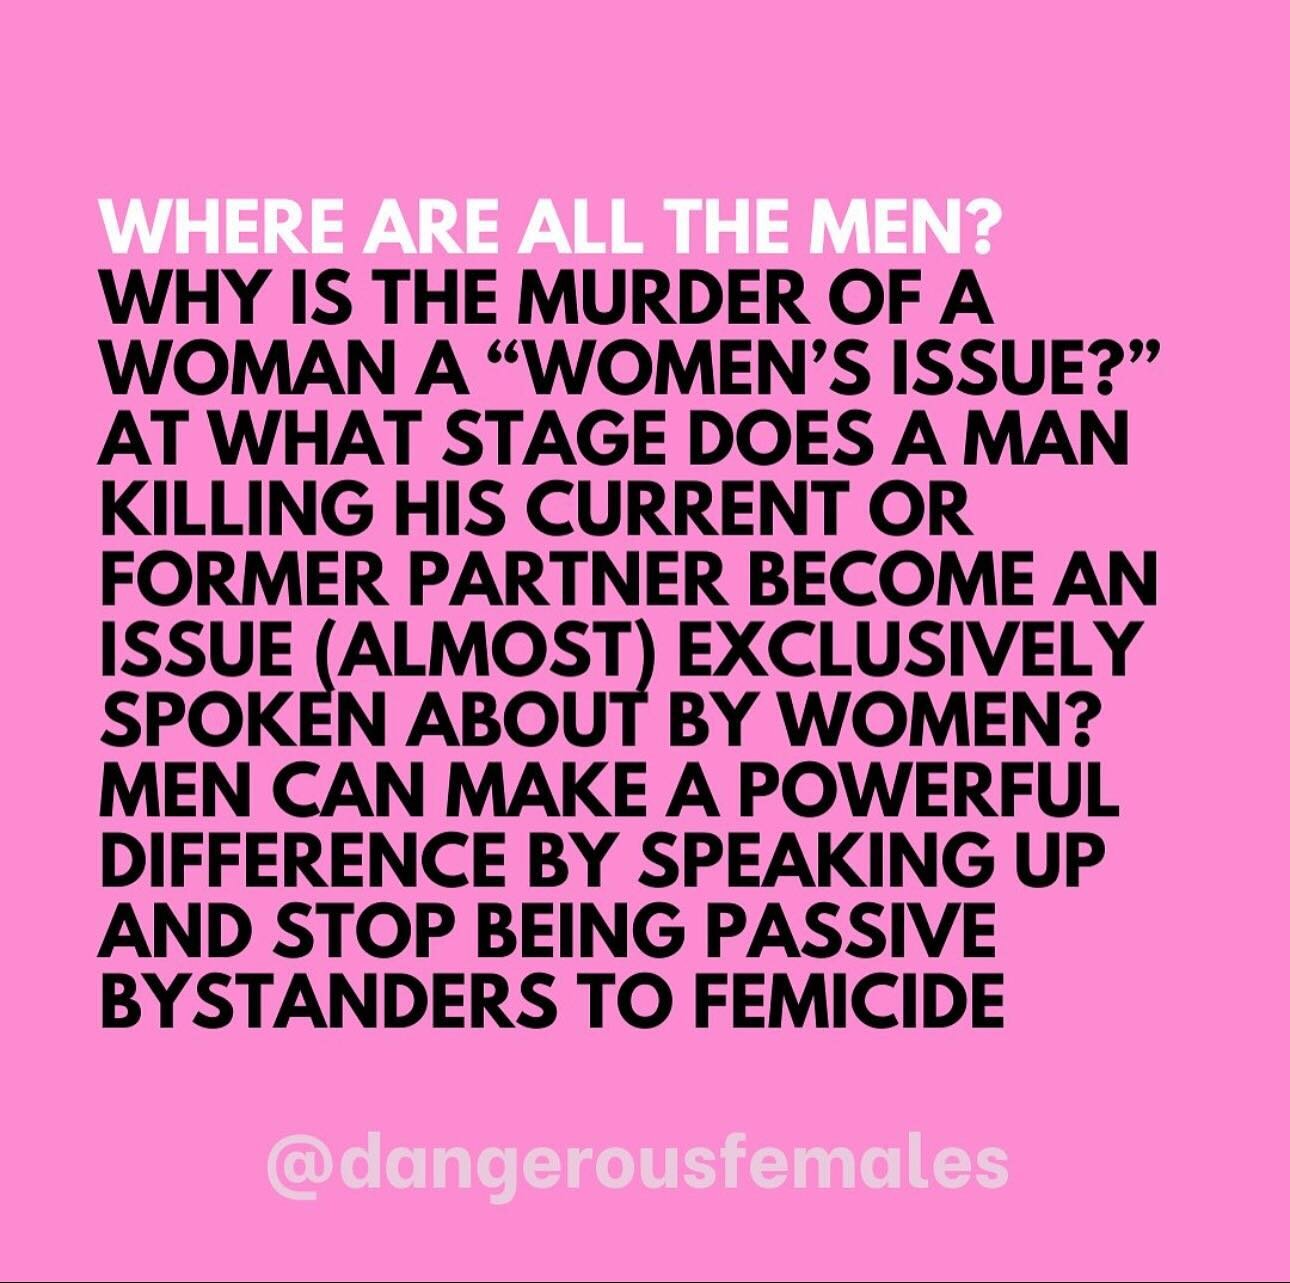 YES, YES, YES! - @dangerousfemales post this morning had me screaming at my phone in agreement. This is a topic that&rsquo;s very close to my heart and one that I&rsquo;ve acknowledged time and time again, is&hellip; COMPLEX. ⁣
⁣
But to put it so sim